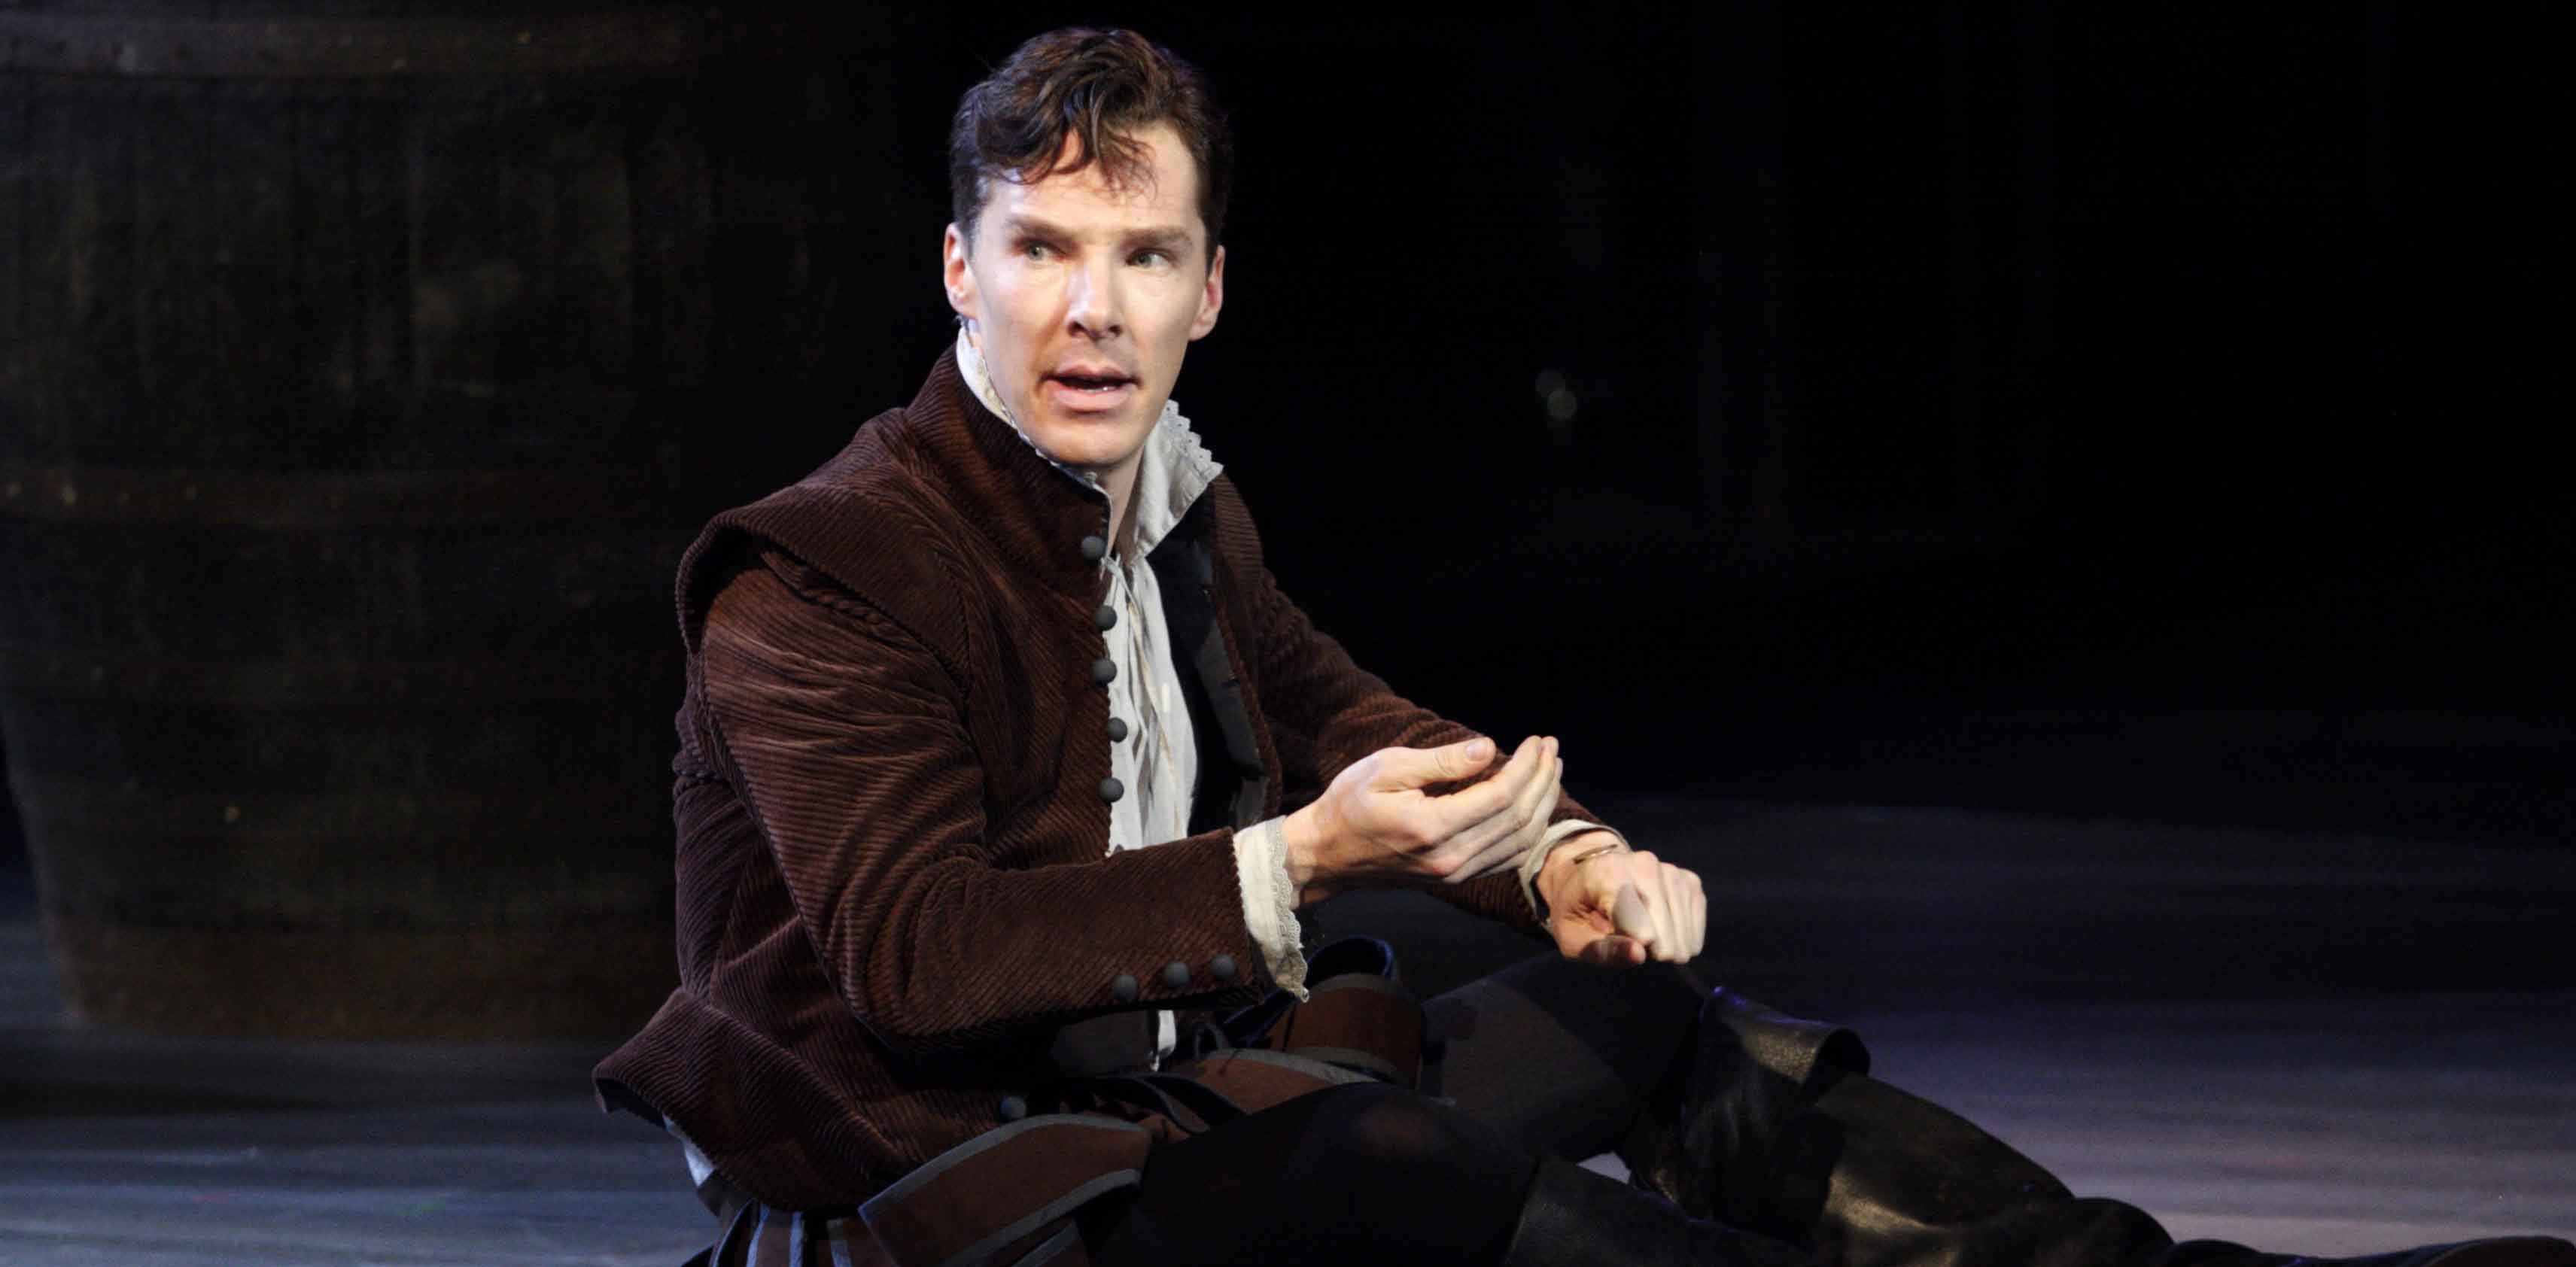 Benedict Cumberbatch in the NT at 50 performance. Photo: Catherine Ashmore